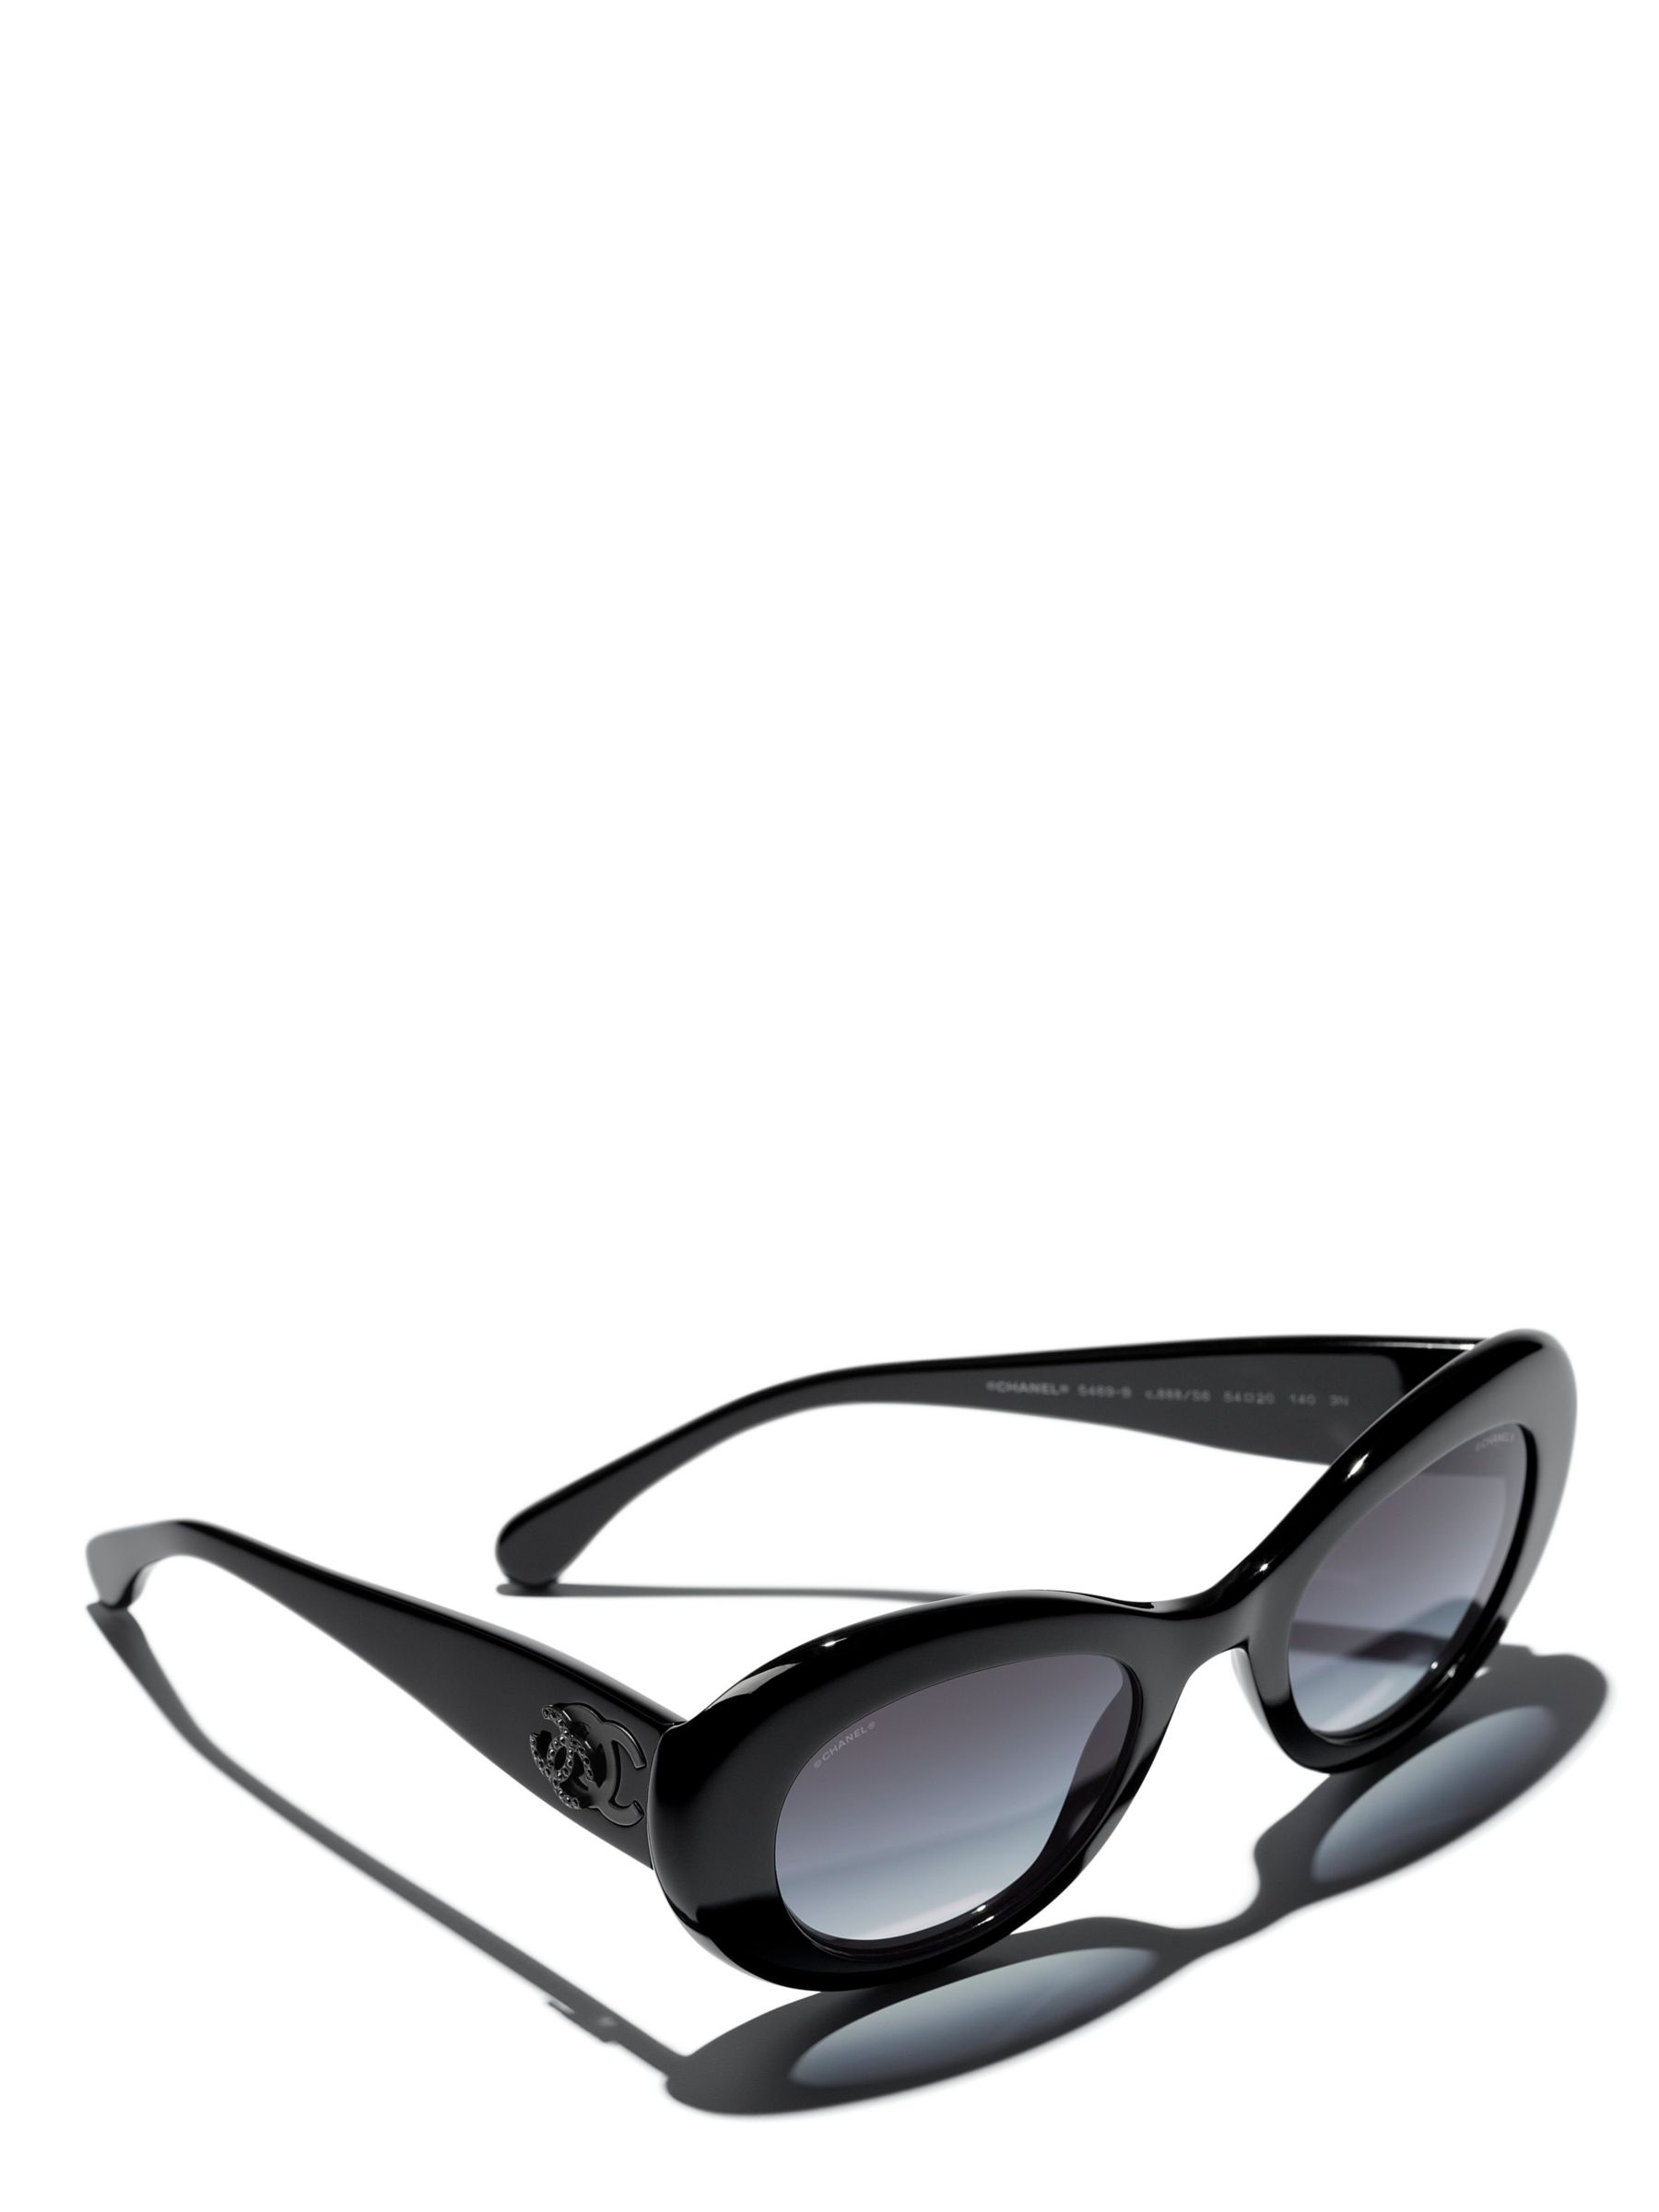 Buy CHANEL Oval Sunglasses CH5469B Black/Grey Gradient Online at johnlewis.com